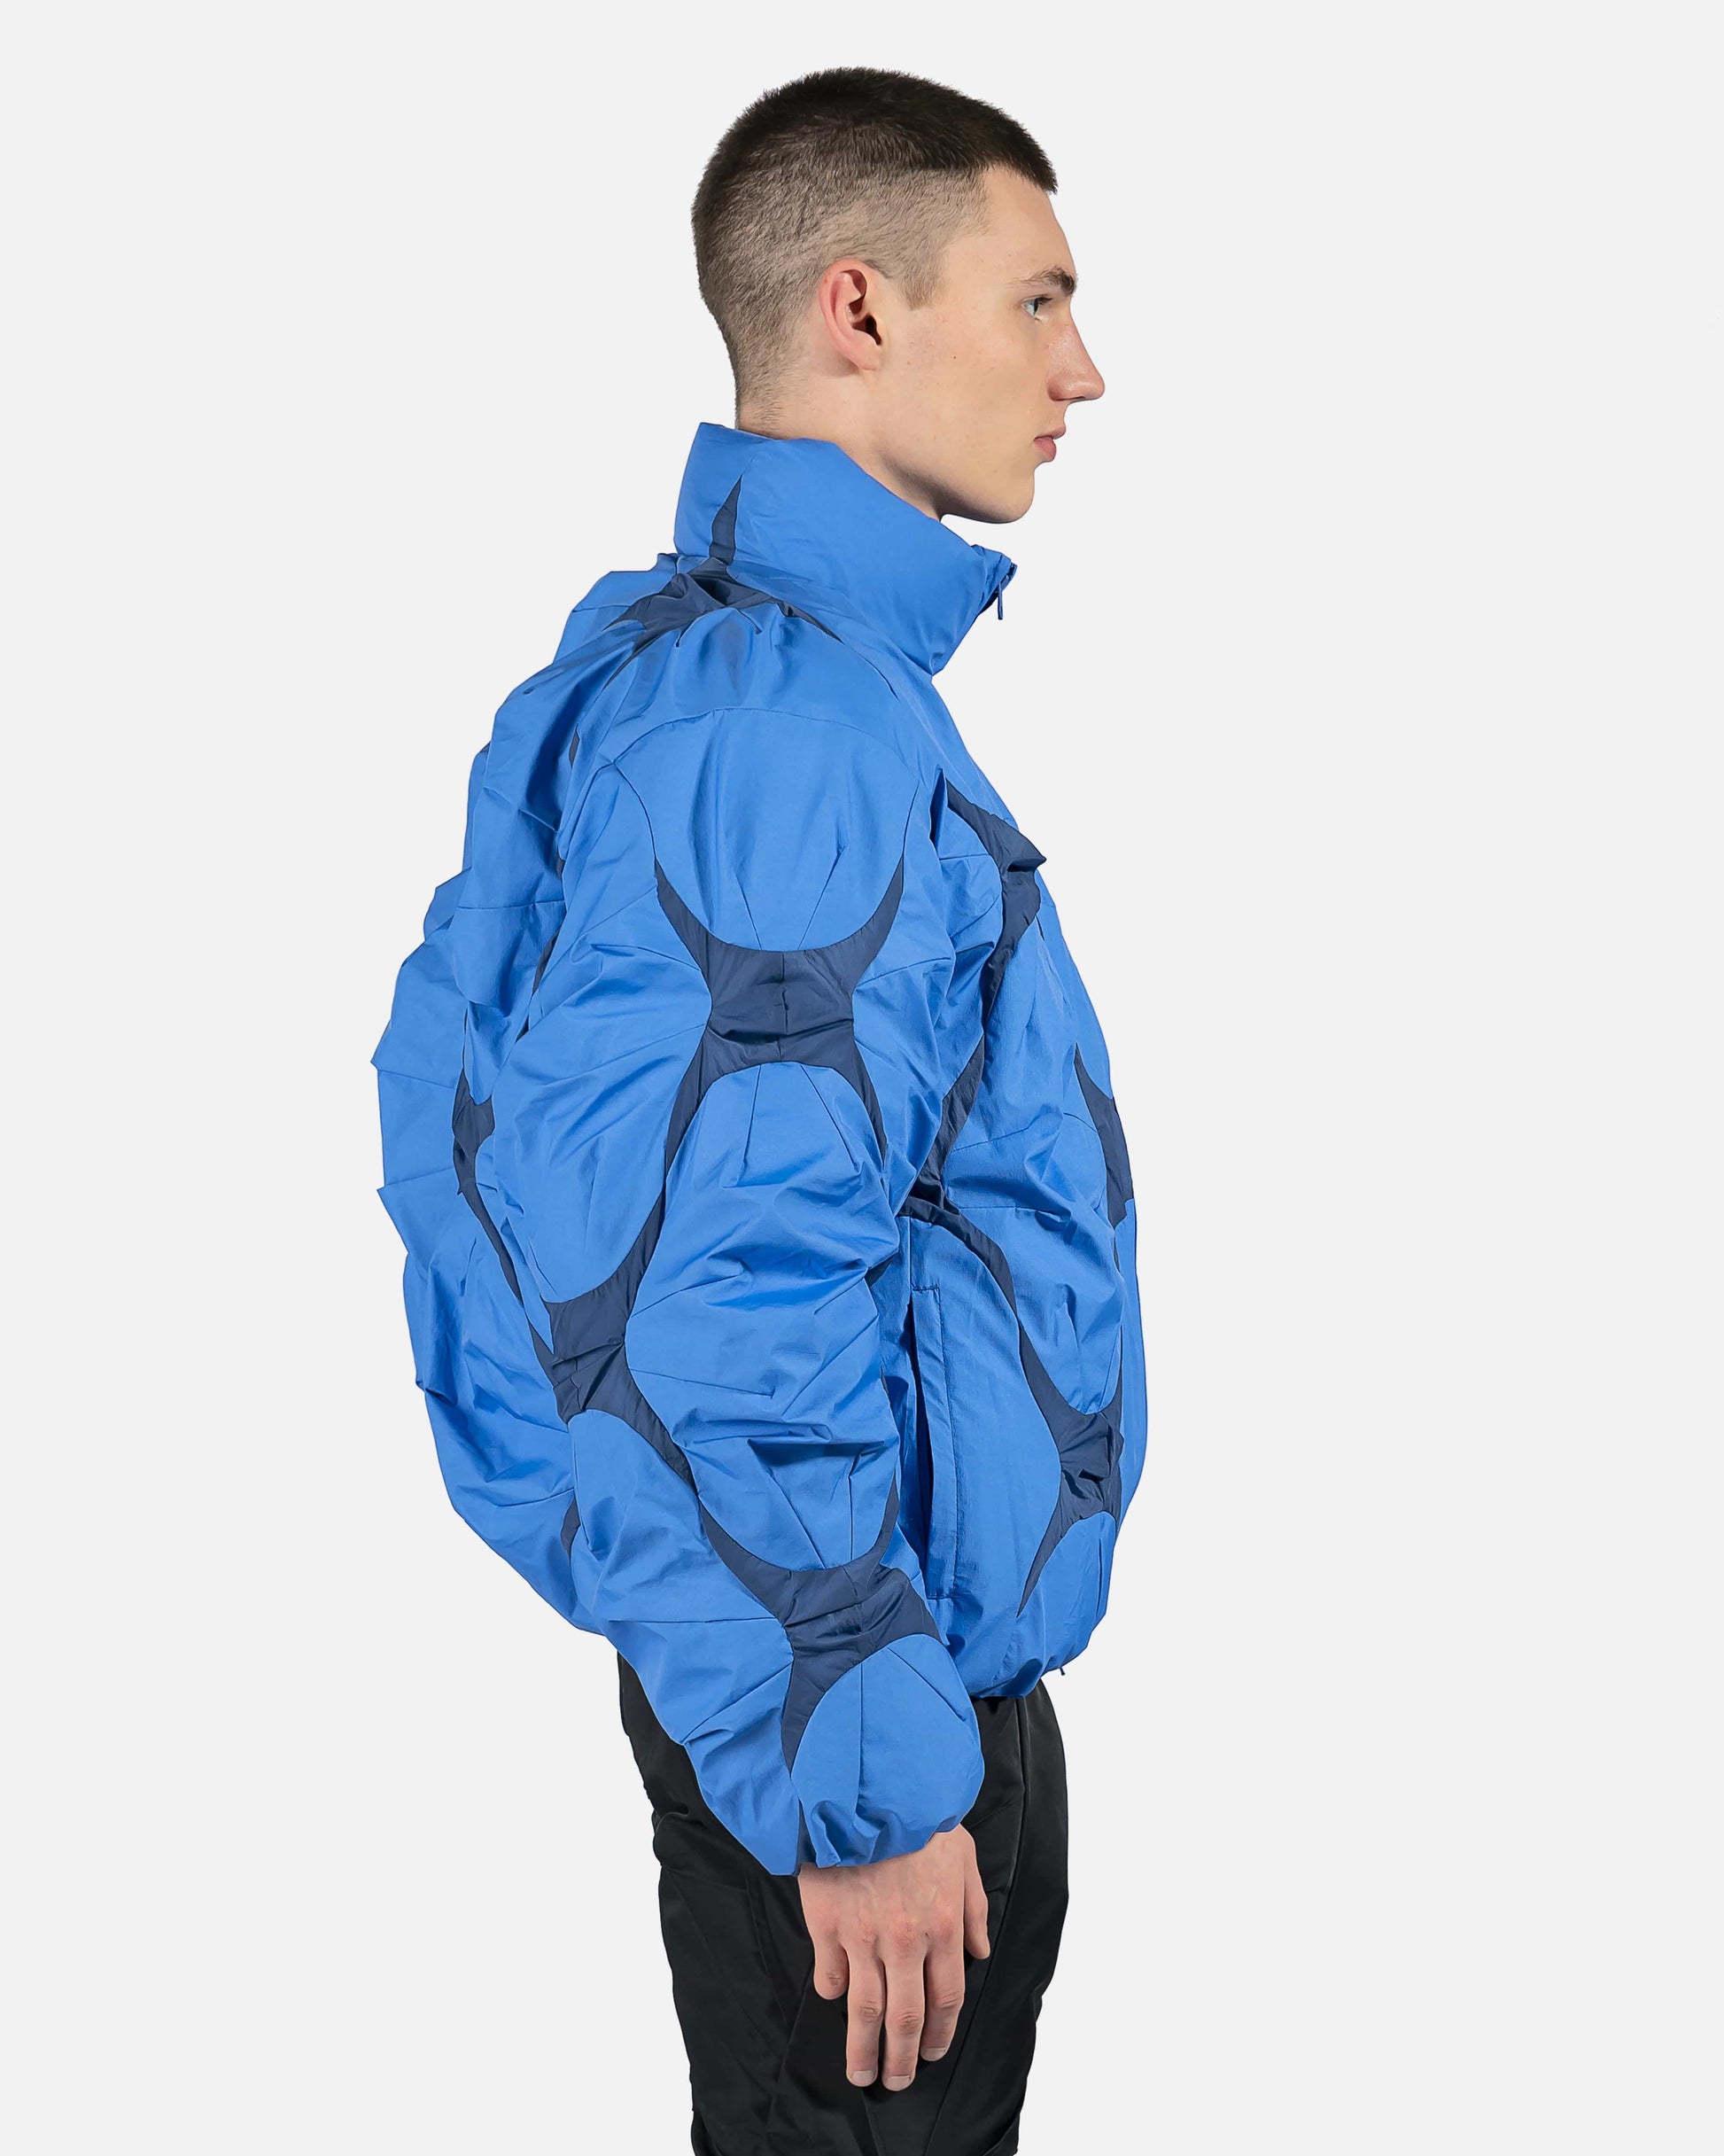 POST ARCHIVE FACTION (P.A.F) Men's Jackets 4.0+ Down Left Puffer Jacket in Blue